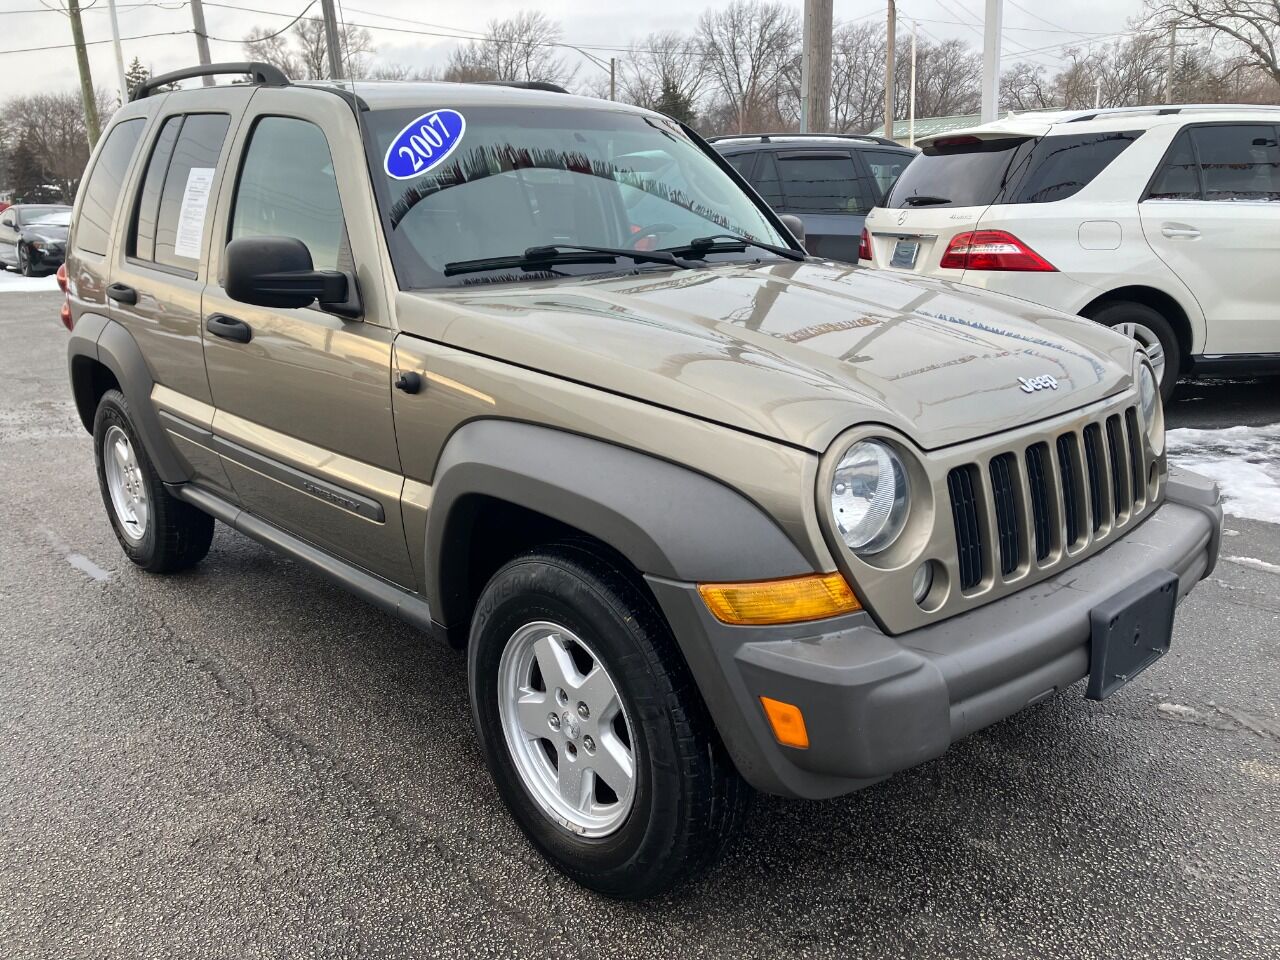 2007 Jeep Liberty For Sale In Austin, MN - Carsforsale.com®